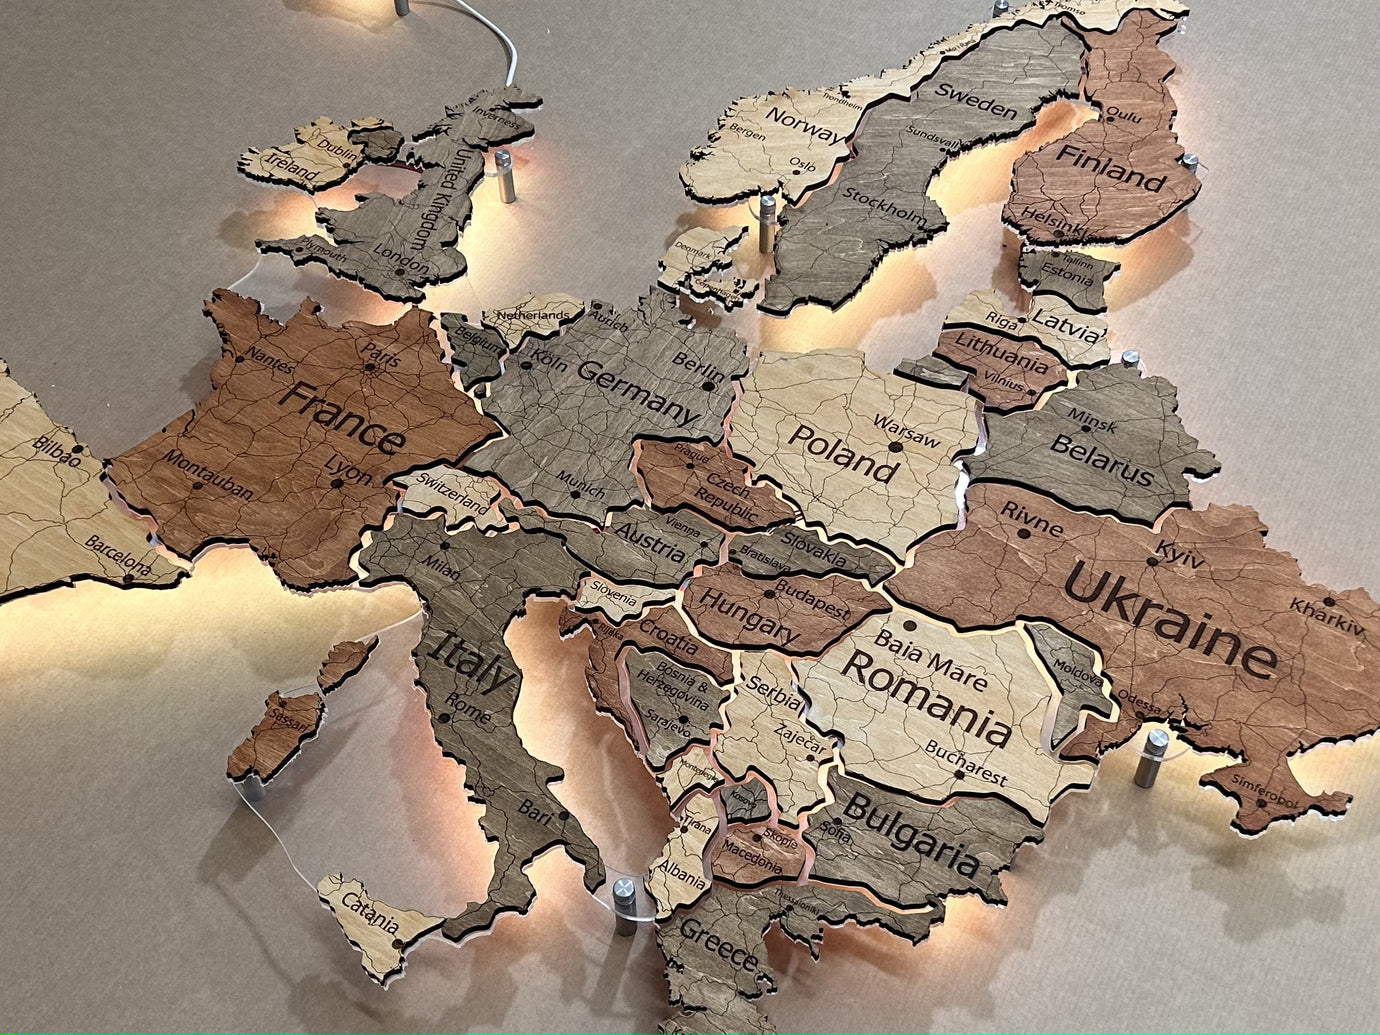 Europe LED map on acrylic glass with backlighting between countries color Warm